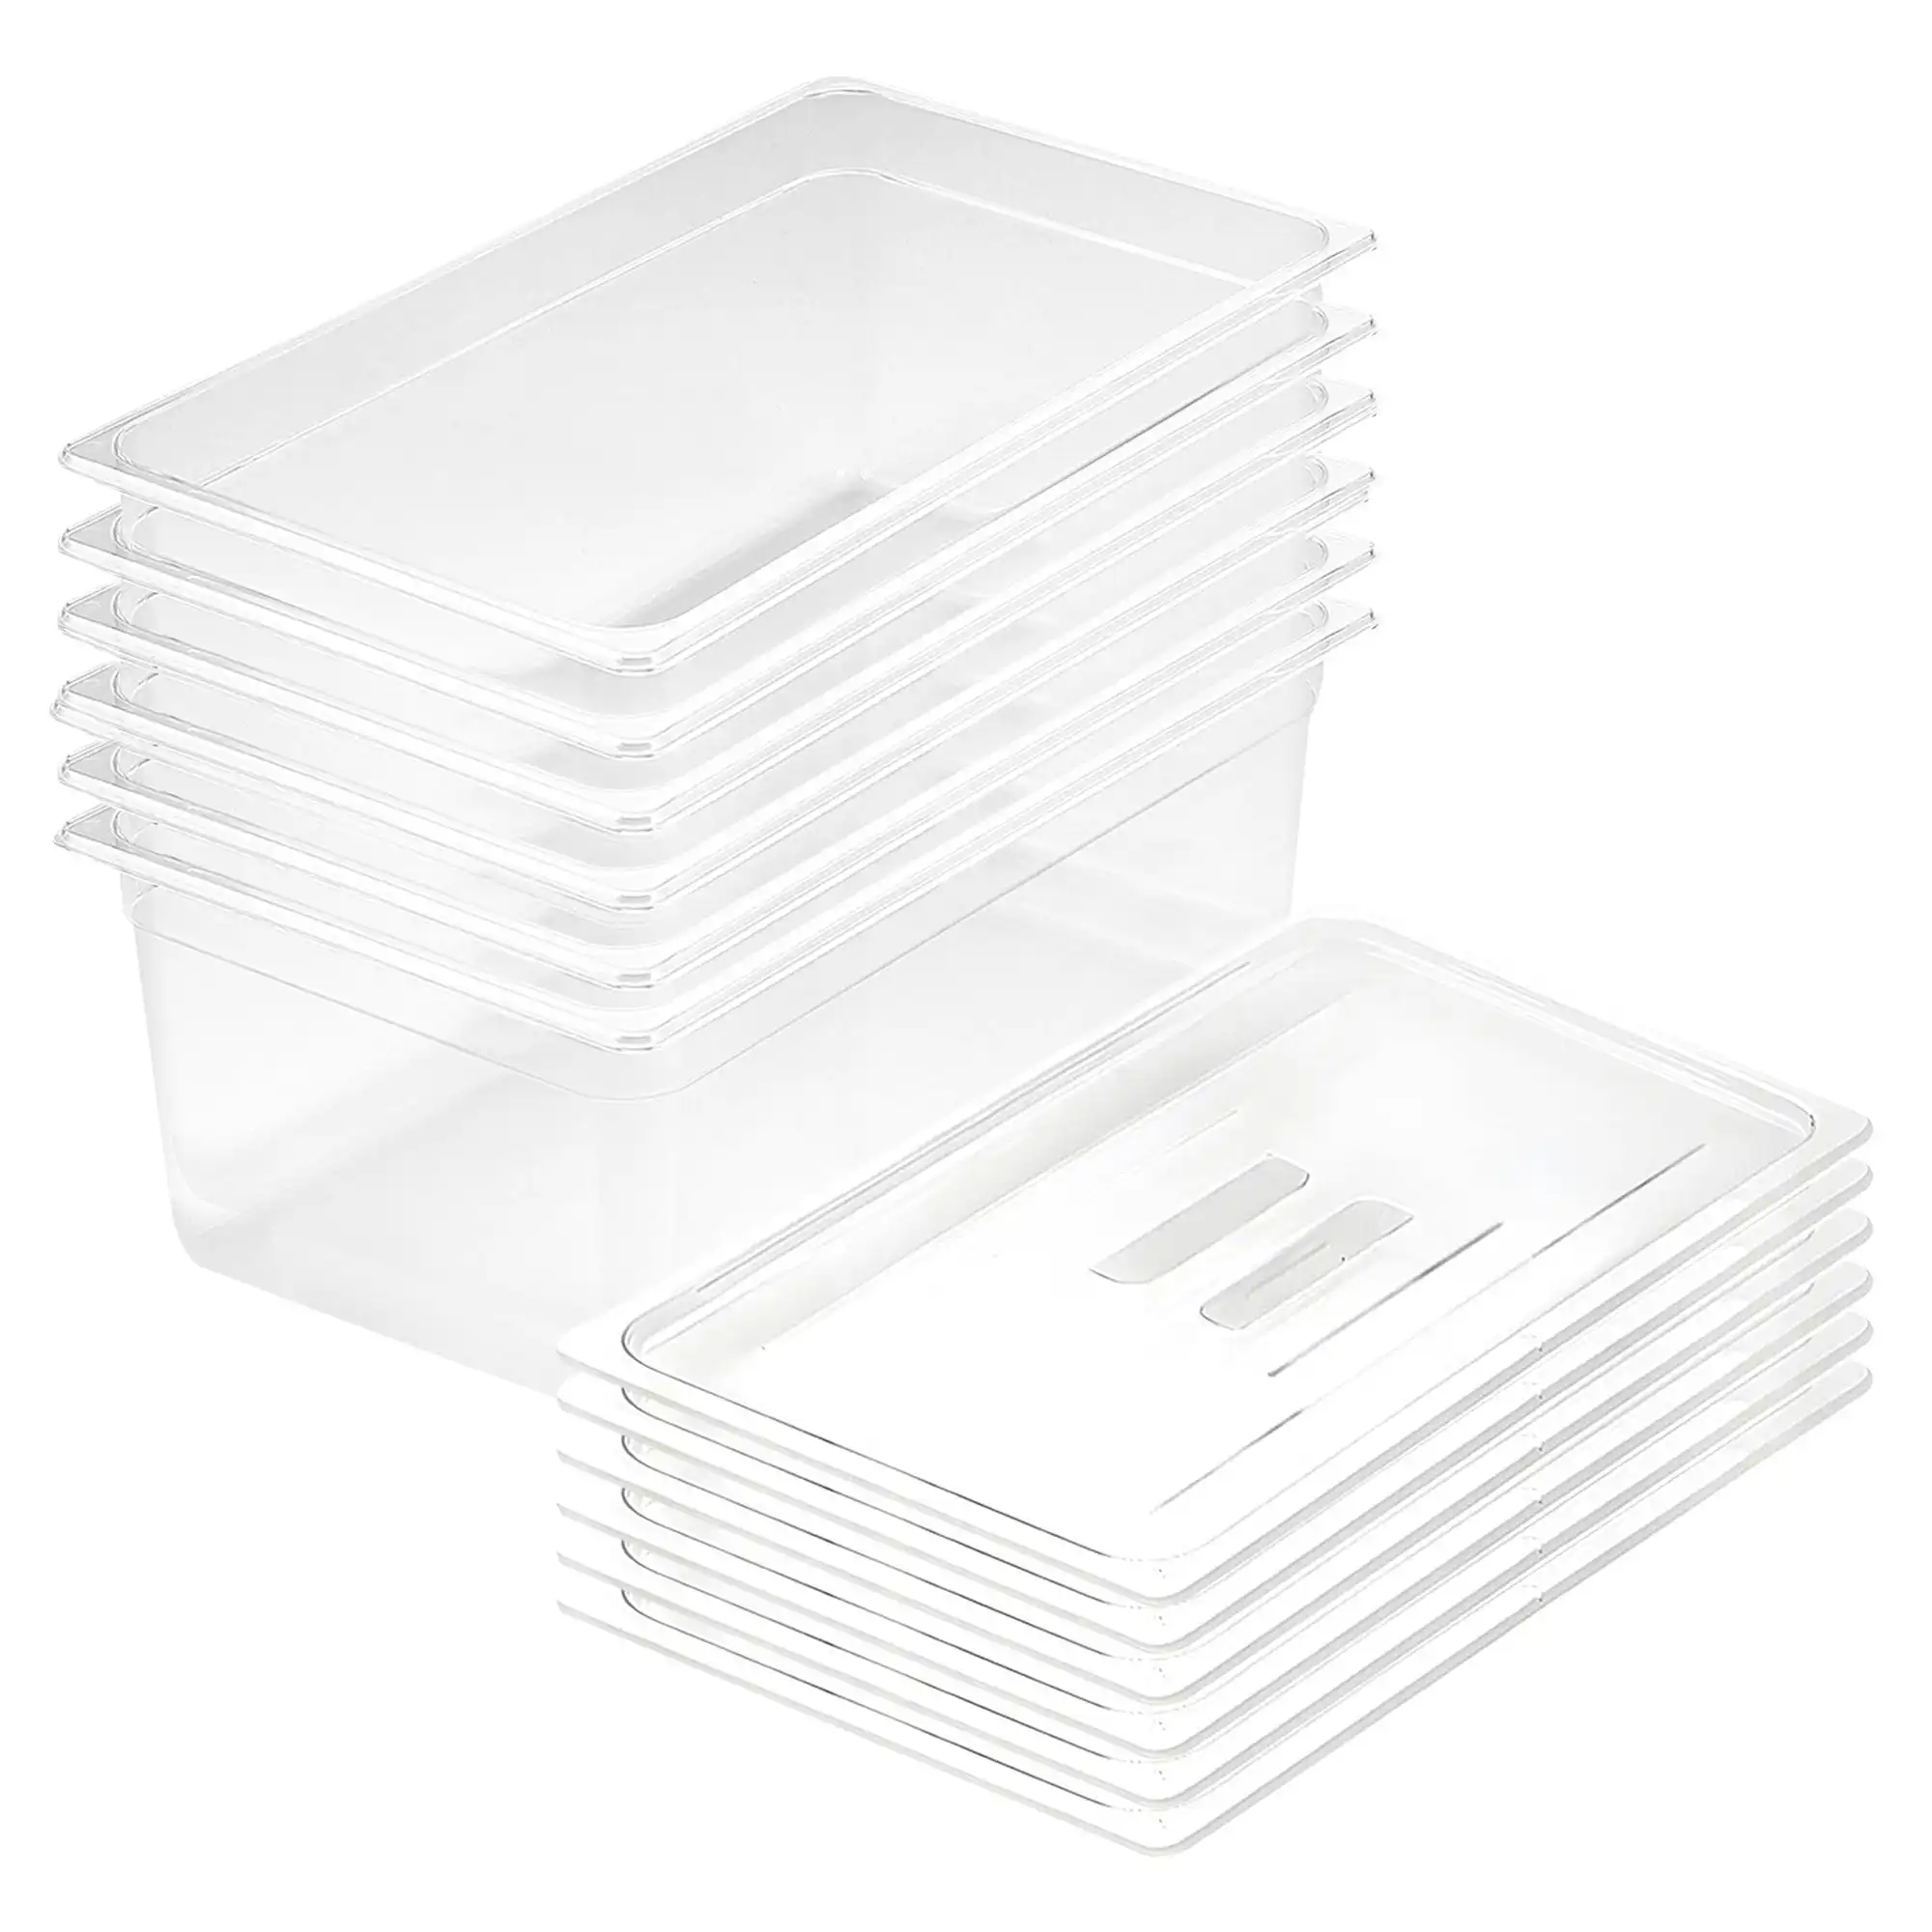 Soga 200mm Clear Gastronorm GN Pan 1/1 Food Tray Storage Bundle of 6 with Lid